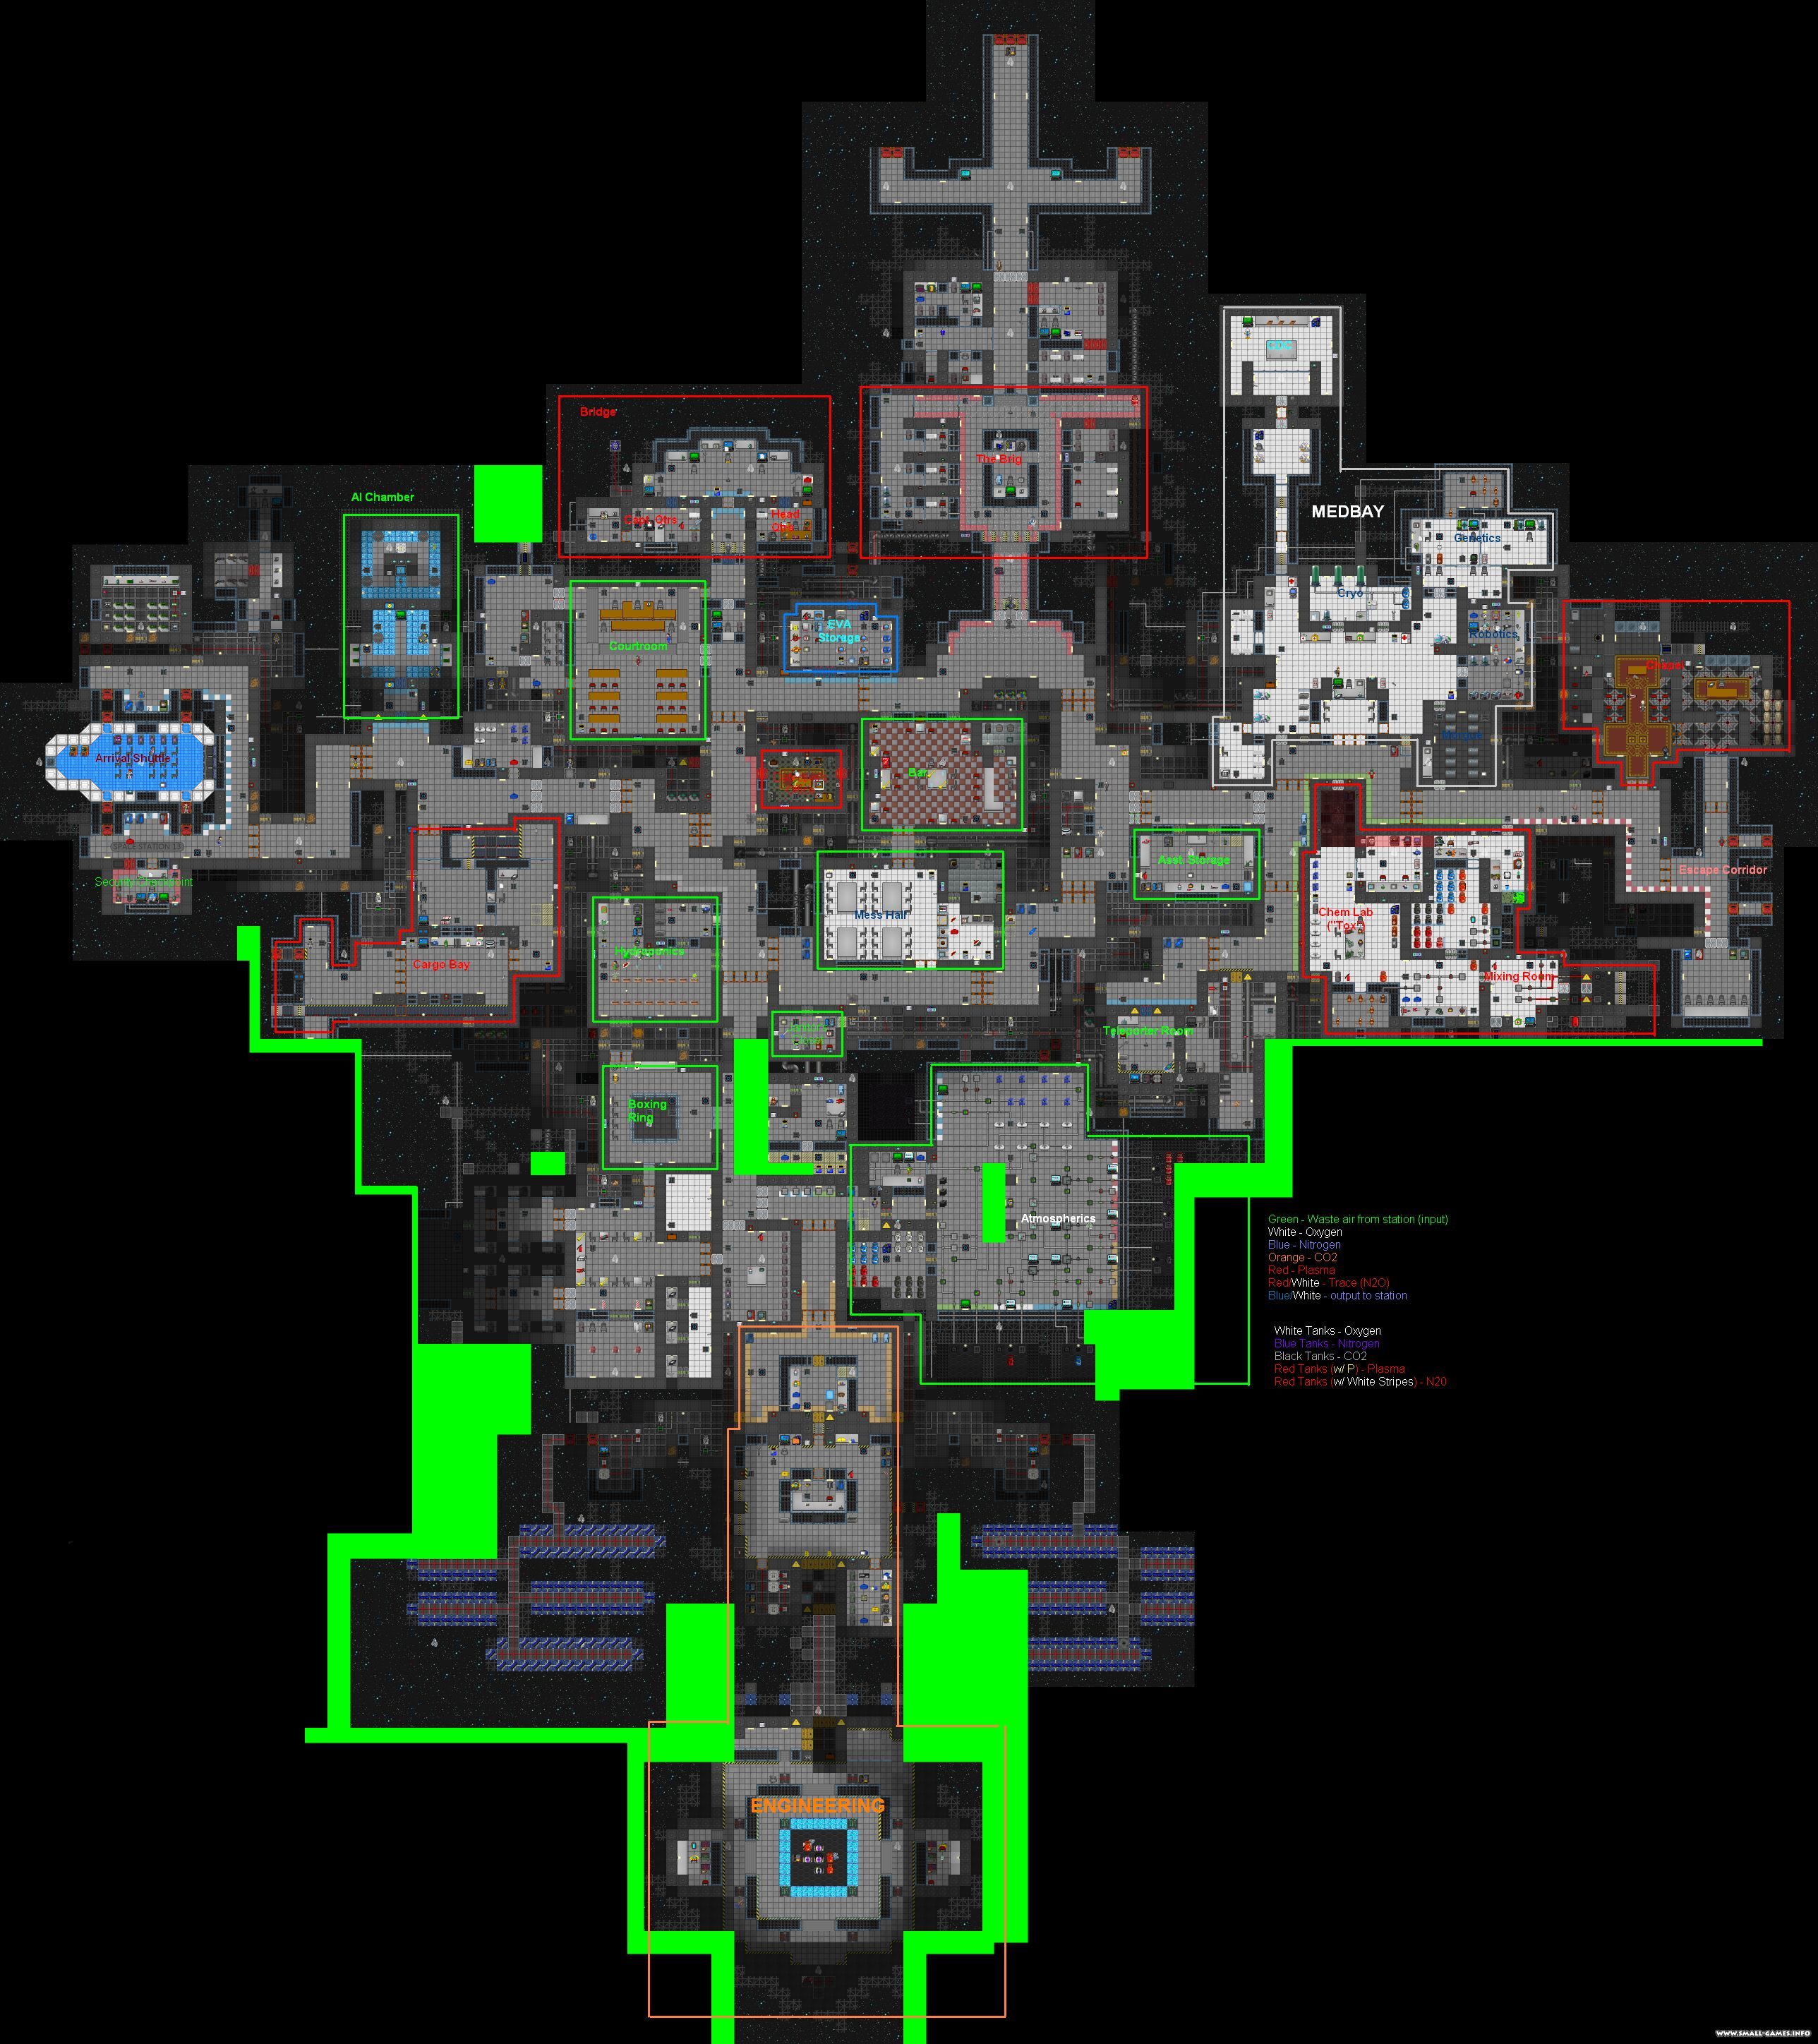 Space Station 13